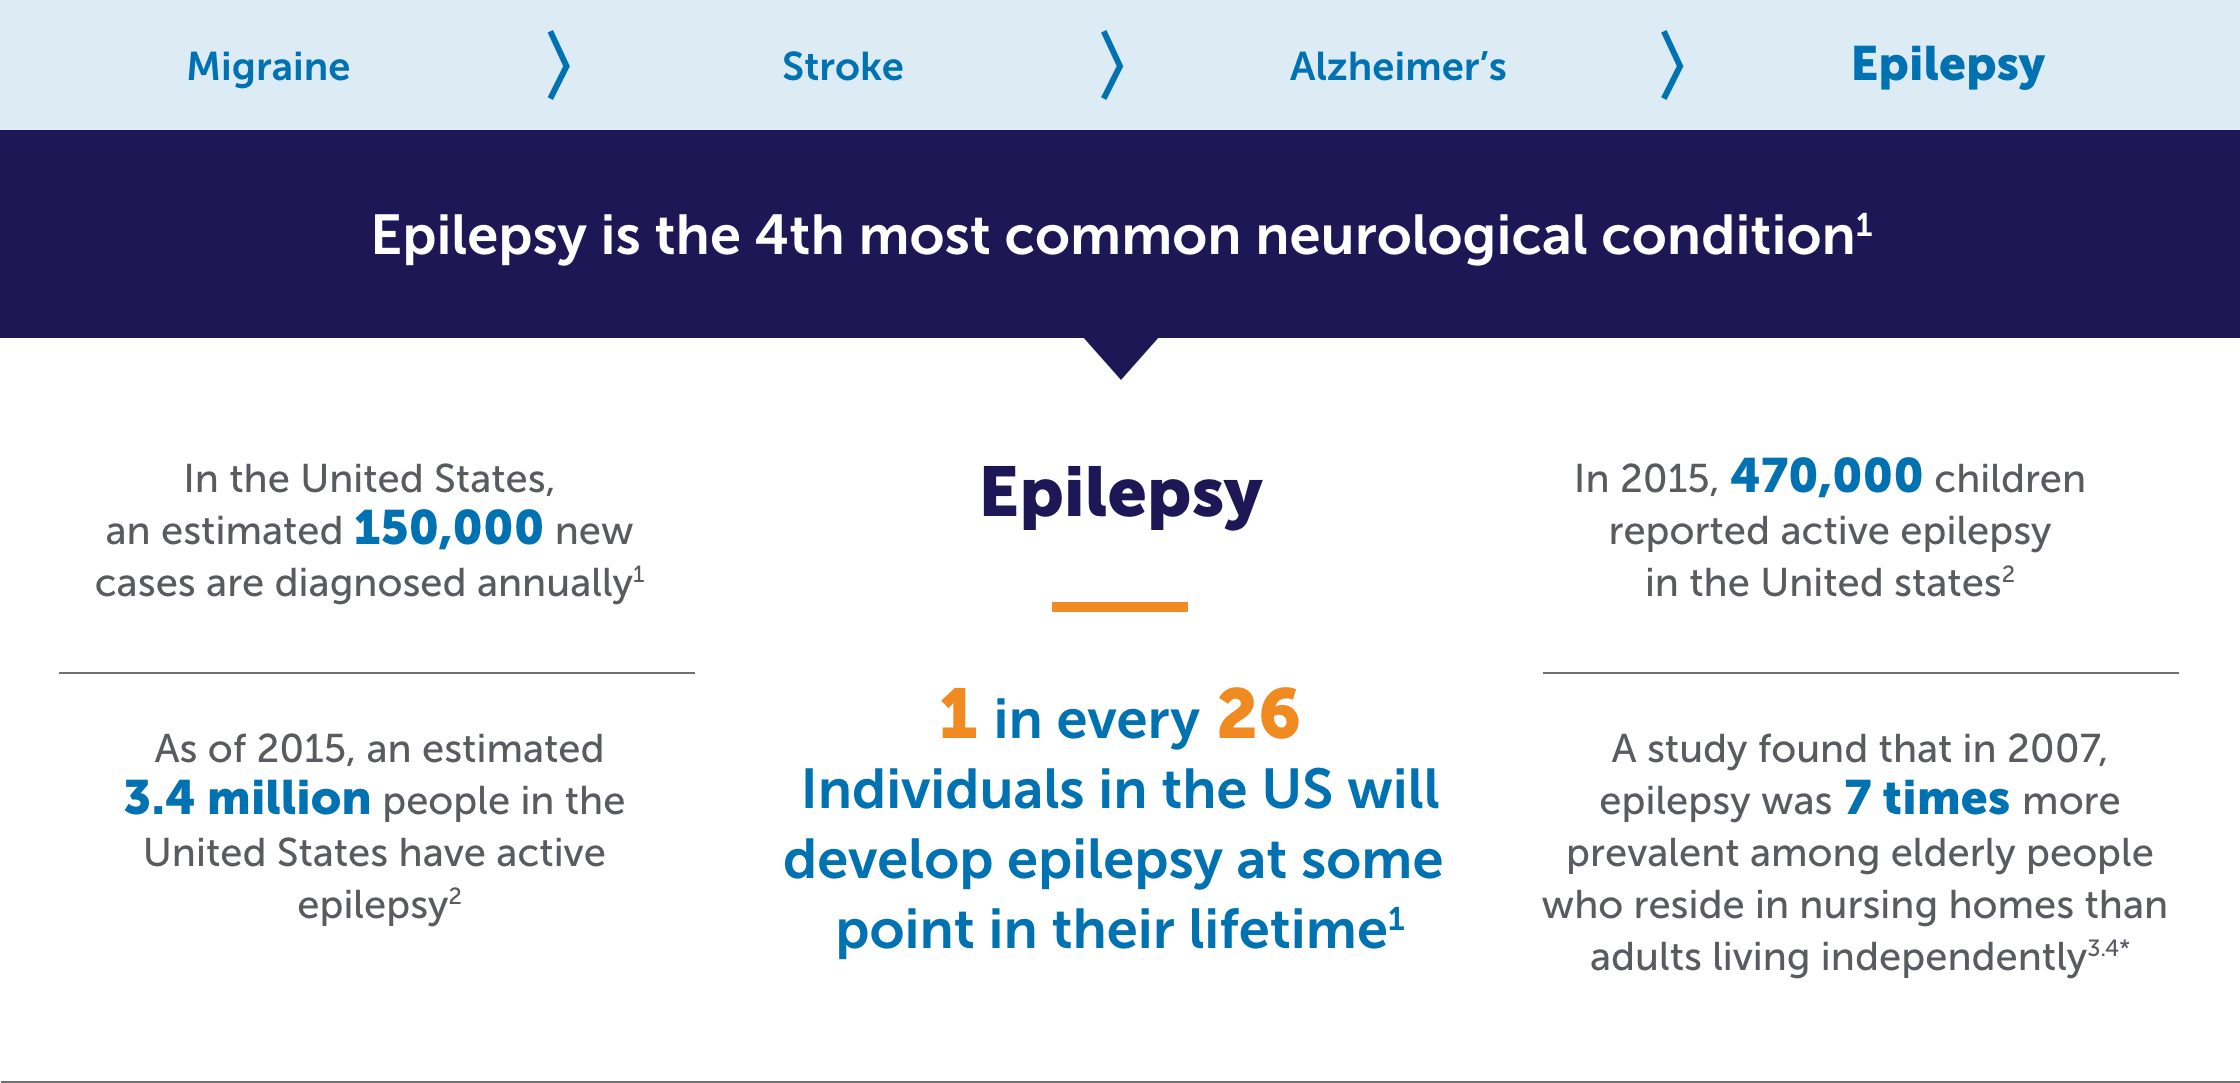 Epilepsy is the 4th most common neurological condition. 1 in every 26 individuals in the US will develop epilepsy at some point in their lifetime.